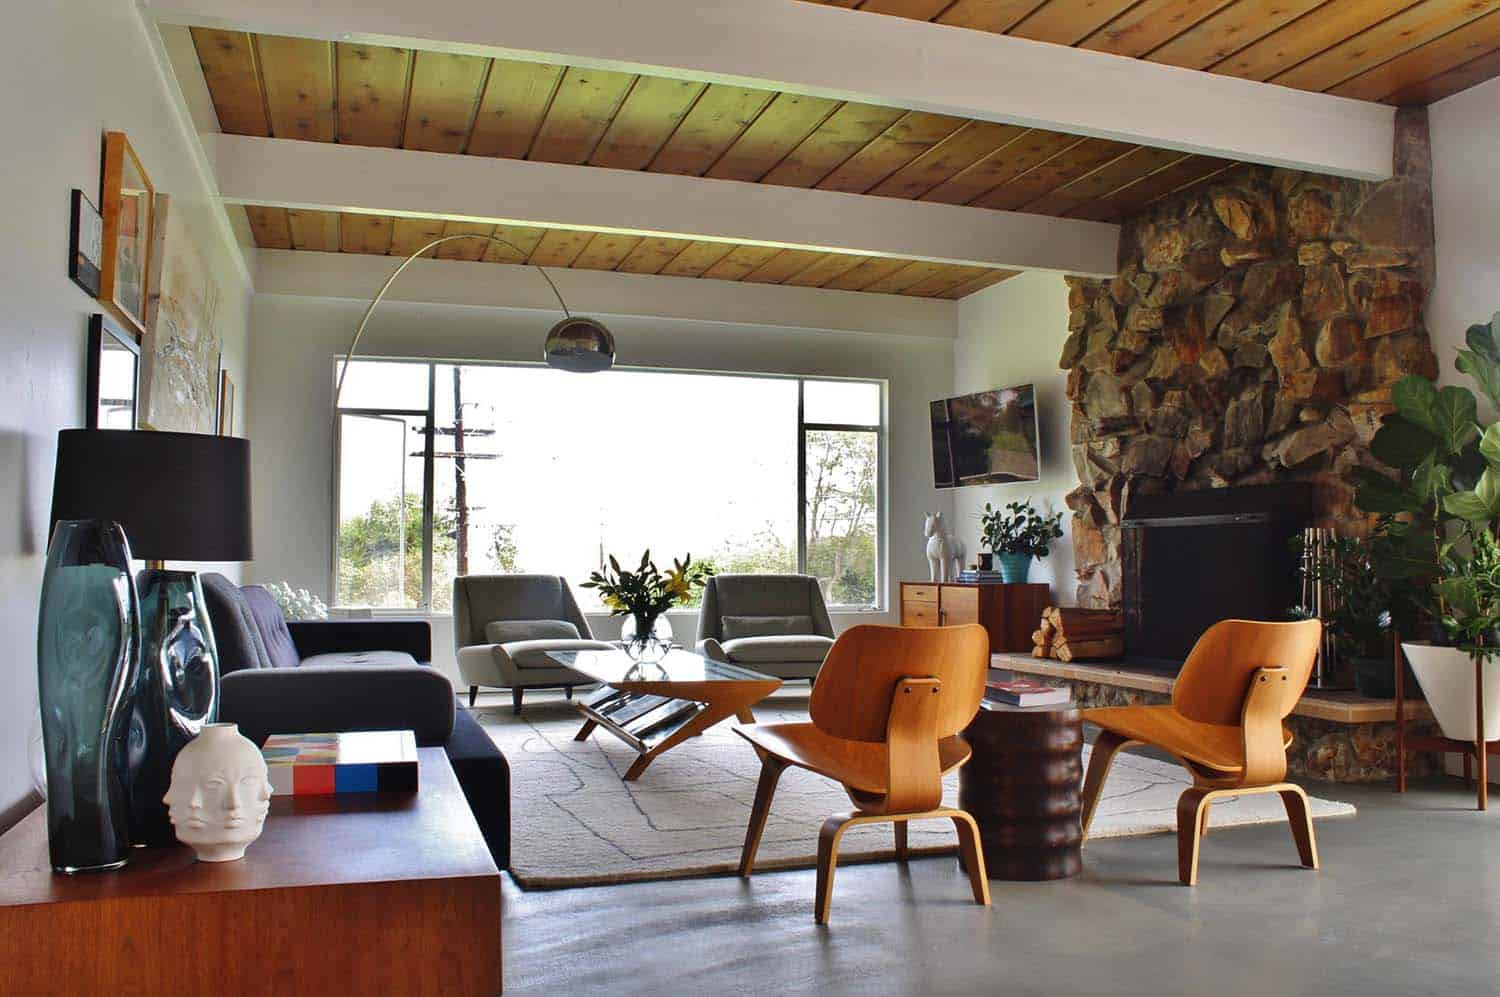 Modern Living Room Ideas
 38 Absolutely gorgeous mid century modern living room ideas